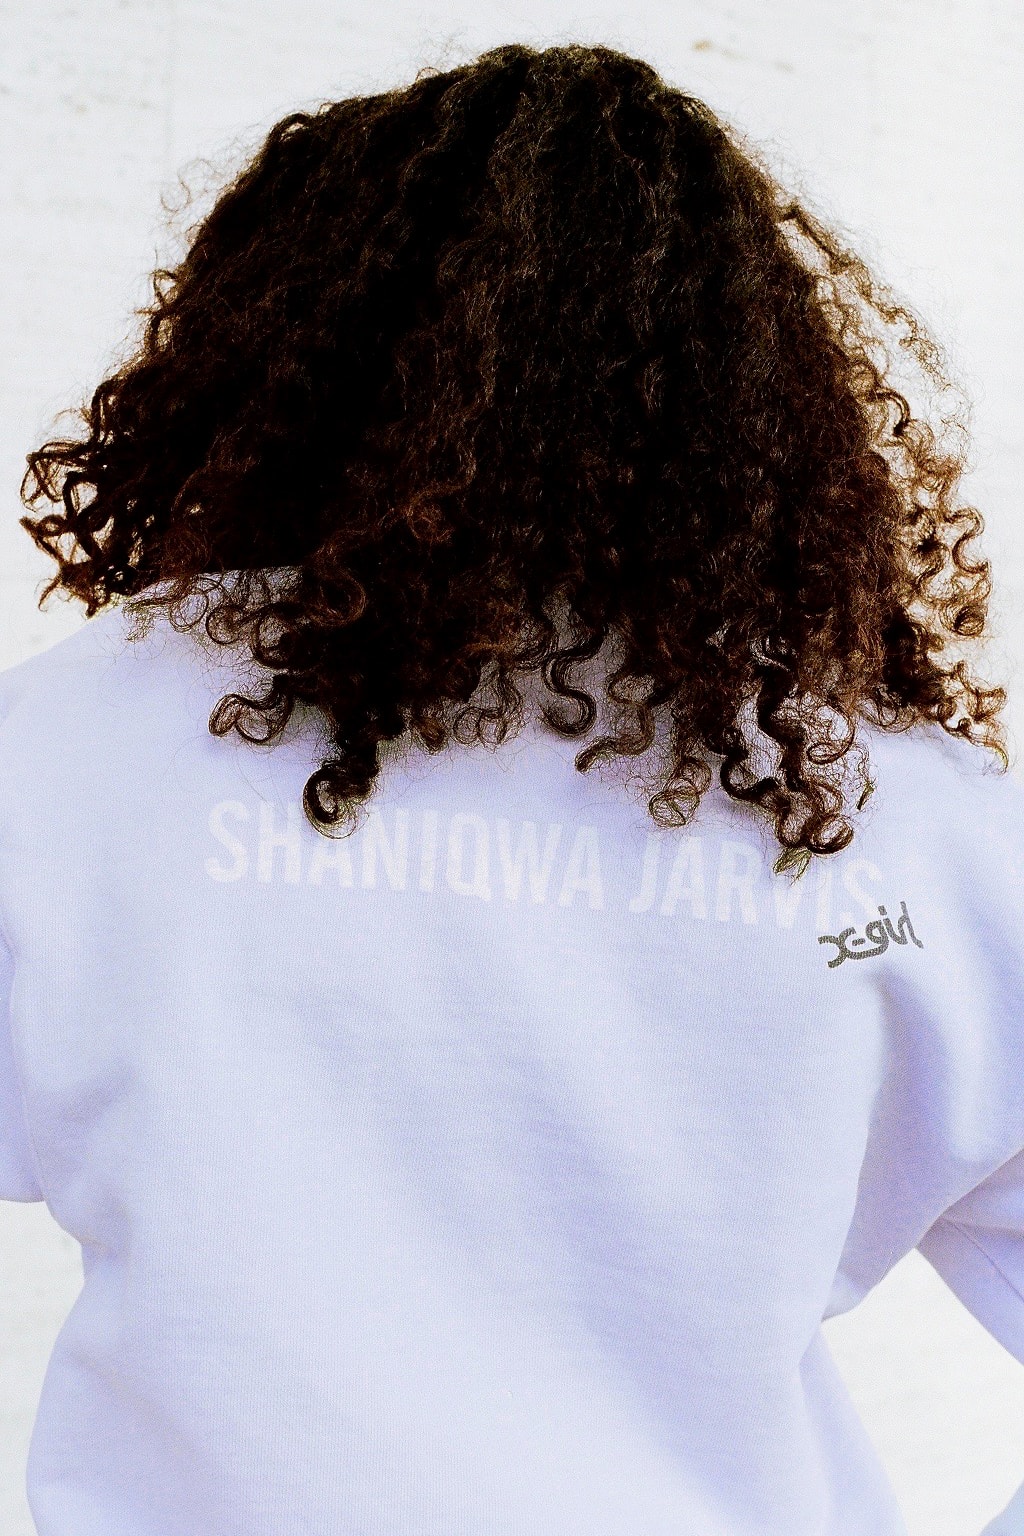 Shaniqwa Jarvis x X-Girl Capsule Collection Crewneck Sweater Purple